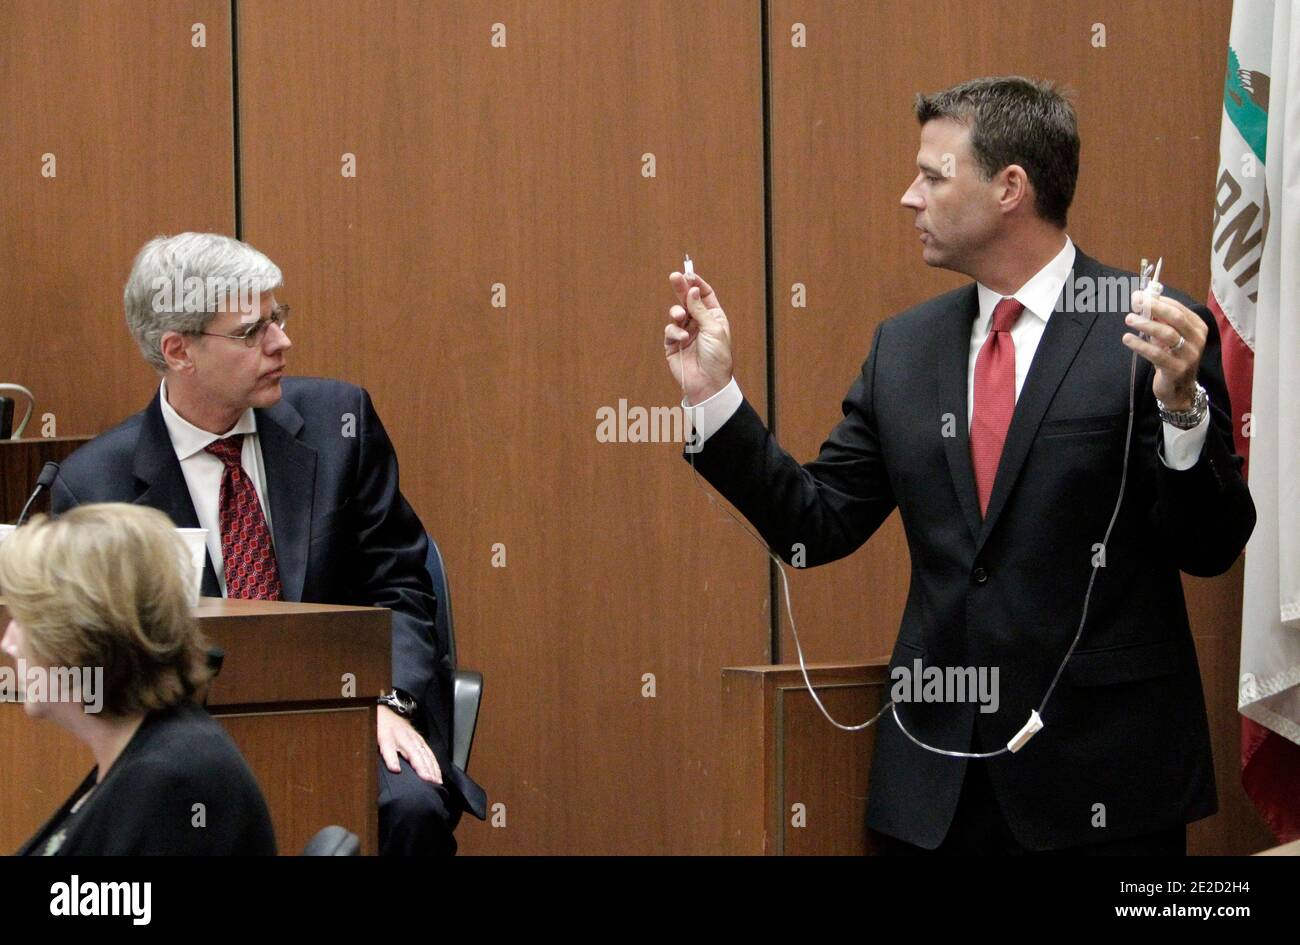 Deputy district attorney David Walgren, right, holds an infusion tube as he examines anesthesiology expert Dr. Steven Shafer during Dr. Conrad Murray's involuntary manslaughter trial in Los Angeles on October 20, 2011. Murray has pleaded not guilty and faces four years in prison and the loss of his medical license if convicted of involuntary manslaughter in Michael Jackson's death. Photo by Reed Saxon/Pool/ABACAPRESS.COM Stock Photo